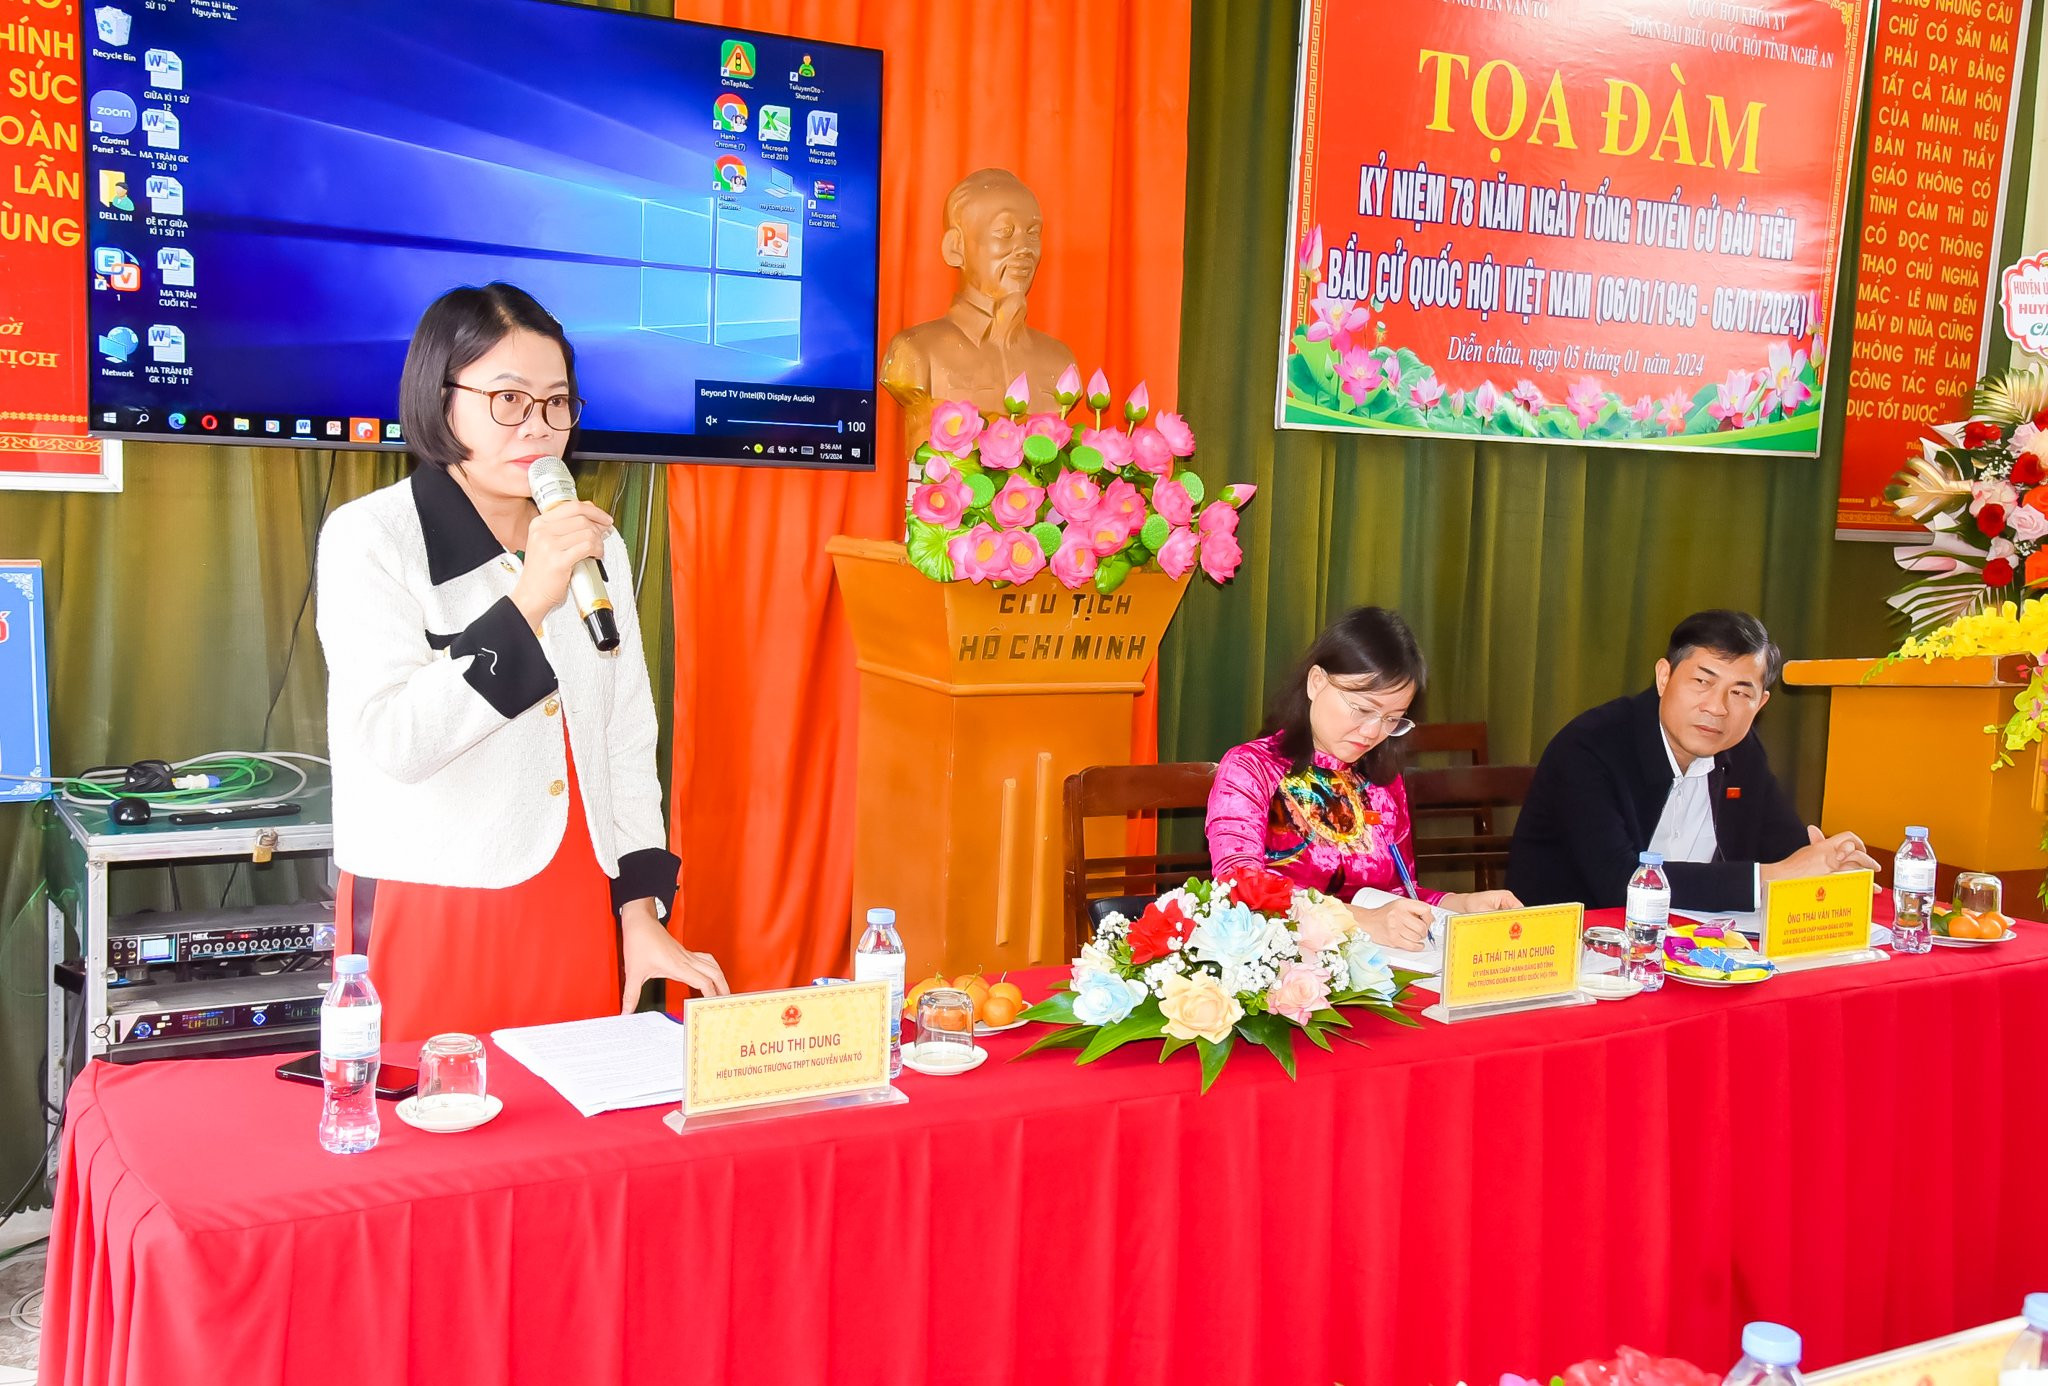 bna-truong-anh-thanh-le-6020.jpg